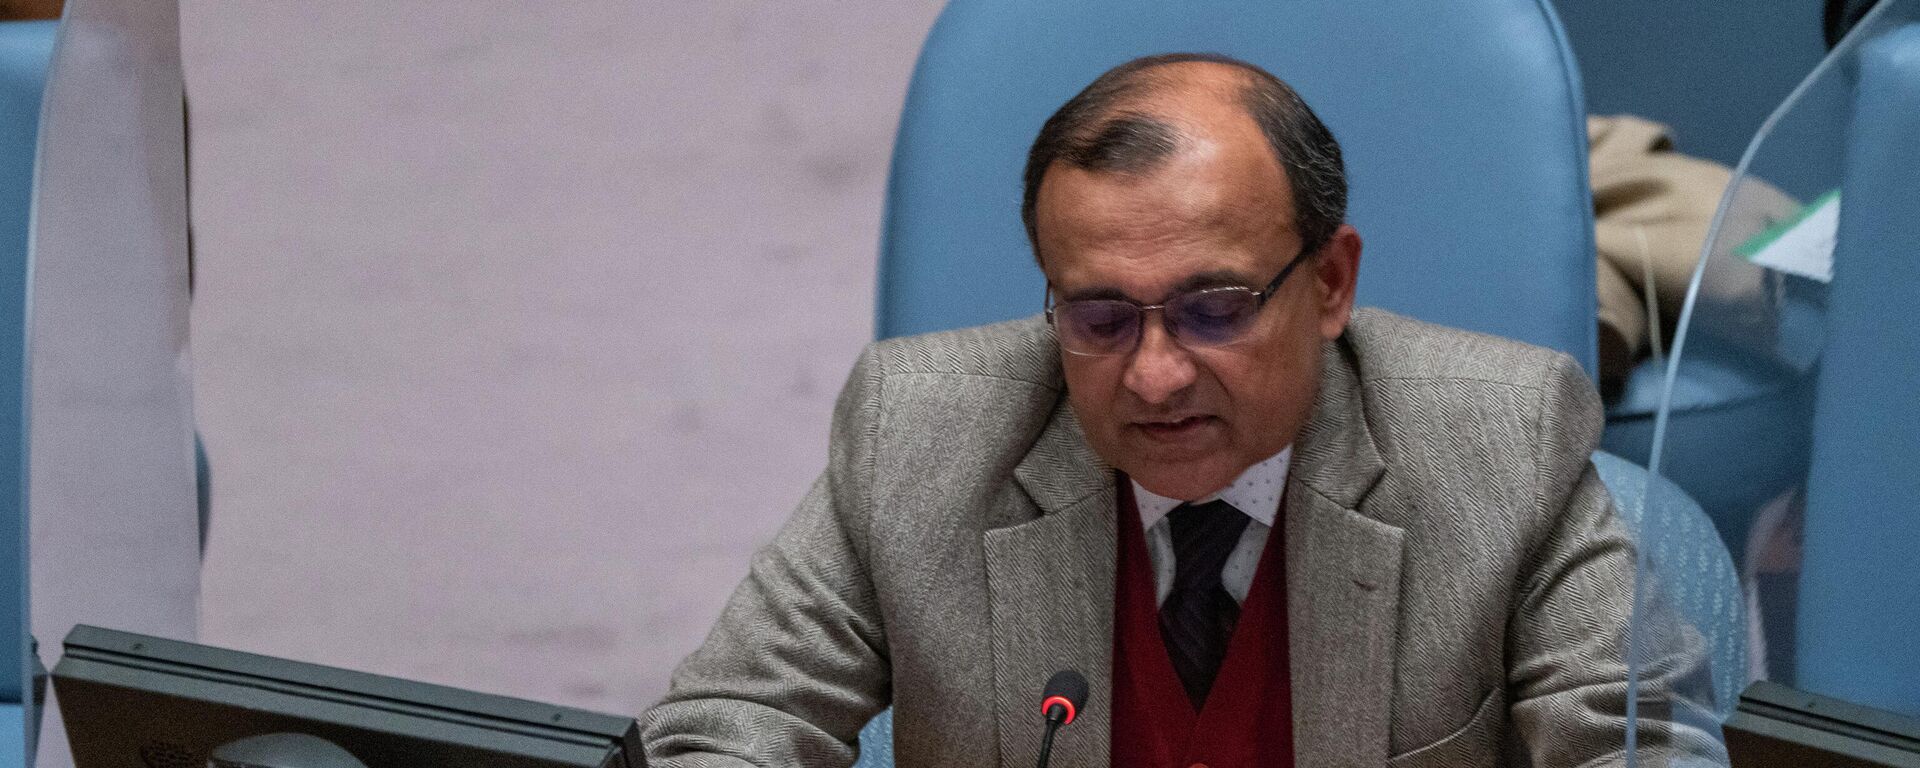 Indian Ambassador to the U.N. T. S. Tirumurti speaks to the United Nations Security Council, amid Russia's invasion of Ukraine, at the United Nations Headquarters in New York City, New York, U.S., March 29, 2022. REUTERS/David 'Dee' Delgado - Sputnik International, 1920, 05.04.2022